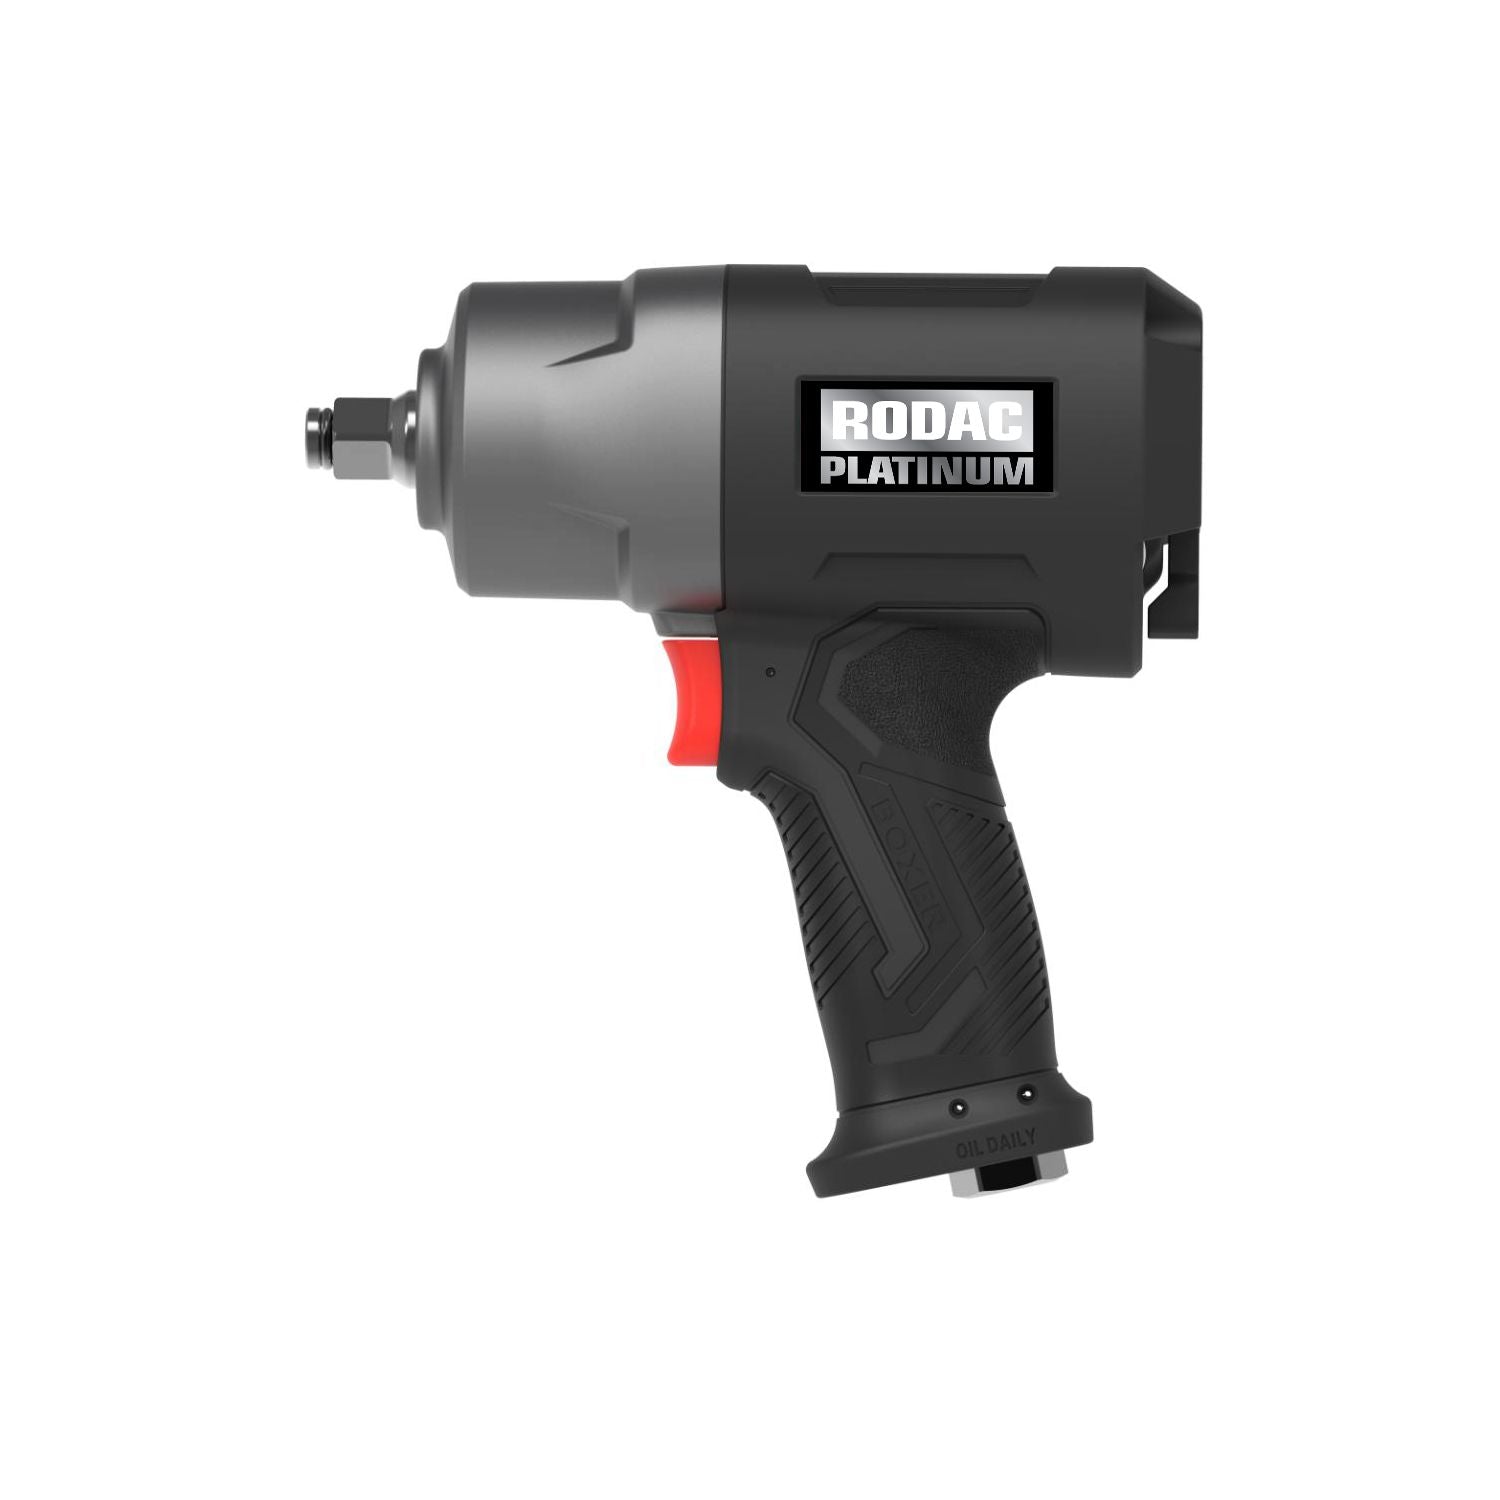 Rodac Composite Impact Wrench 1/2" Square Drive, 1245 Ft. Lb.